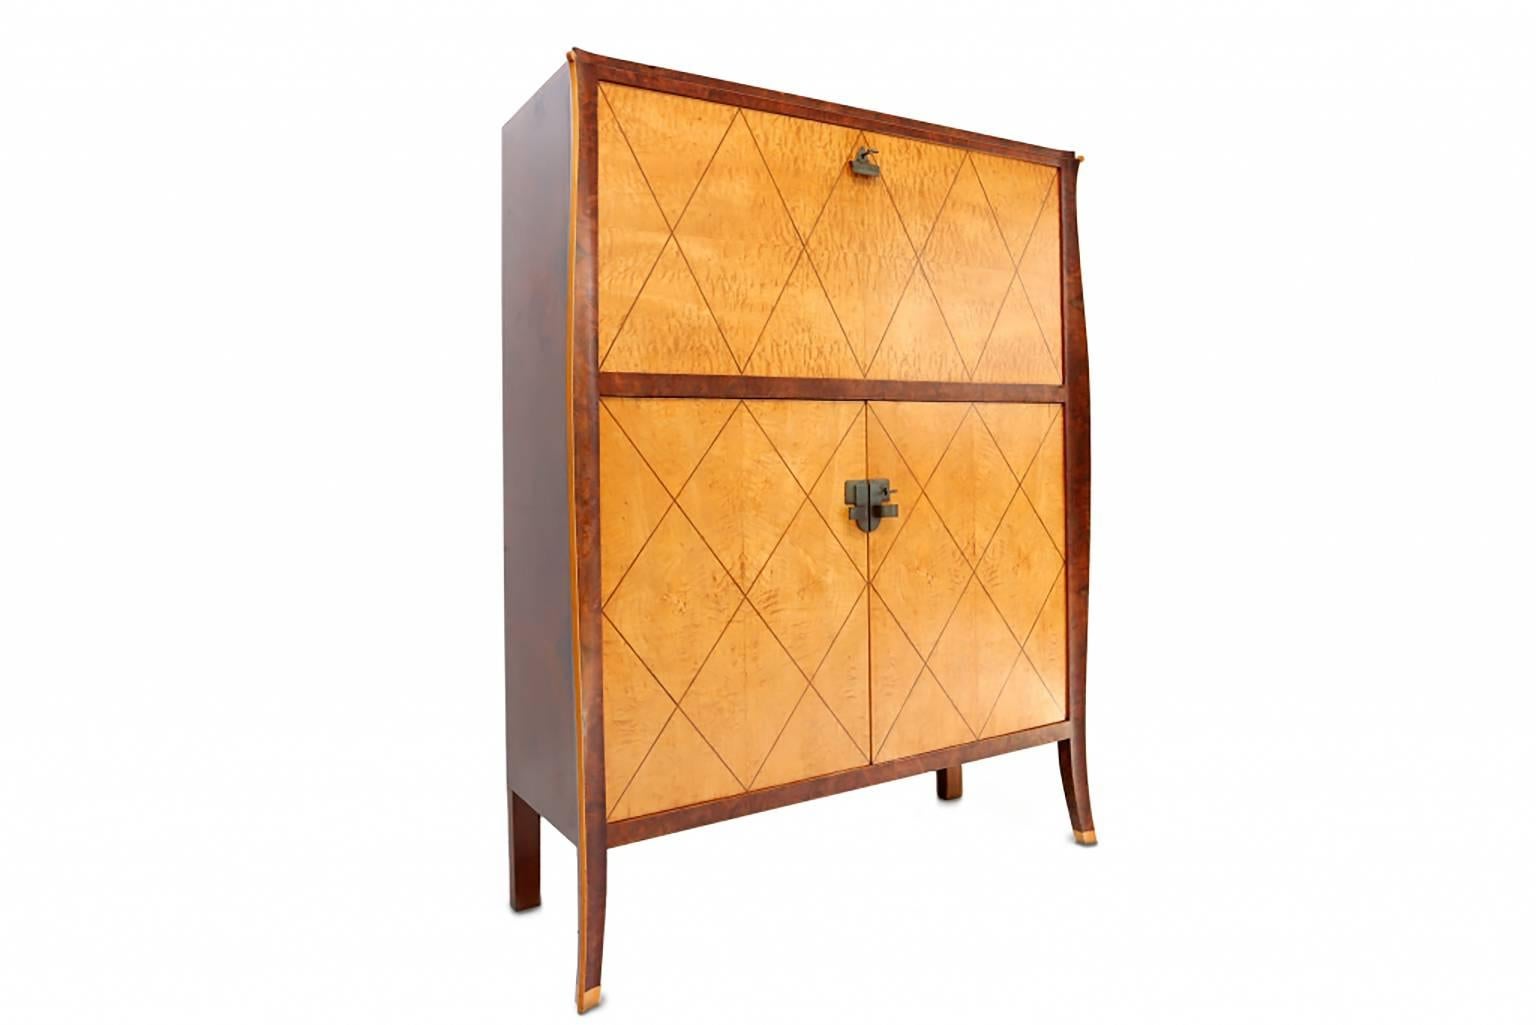 Beautiful Art Deco bar cabinet.
Maple and burl, diamond pattern, bronze details
circa 1940s
Measures: H 160 cm x L 122 cm x D 47 cm.

Would fit well in a jean royere inspired eclectic interior